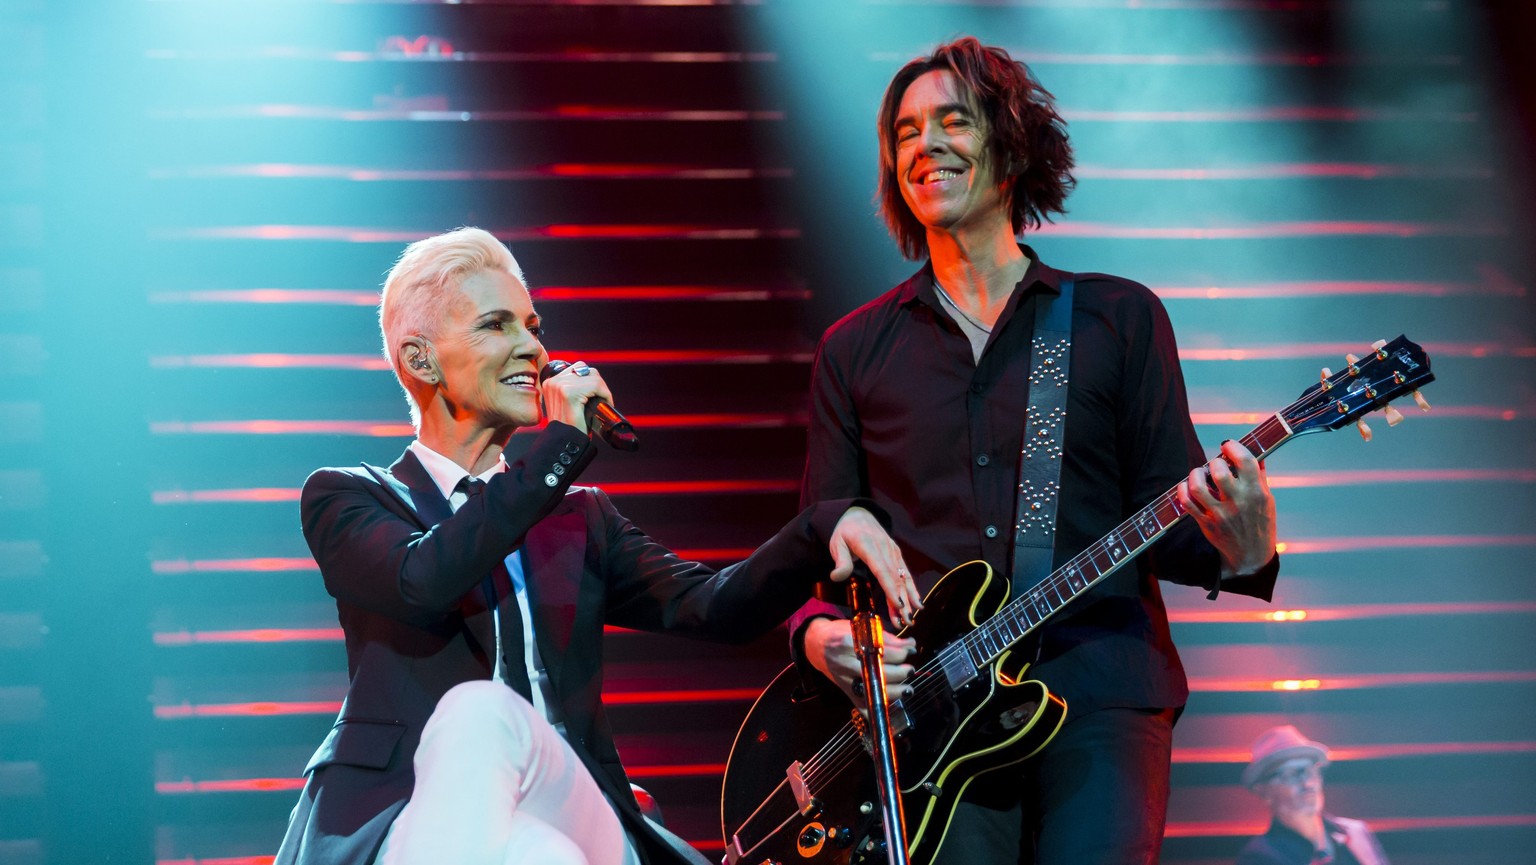 Marie Fredriksson, left, and Per Gessle, members of the Swedish pop-rock band Roxette perform live in Papp Laszlo Budapest Sports Arena in Budapest, Hungary, Tuesday, May 19, 2015. (Balazs Mohai/MTI,  ...